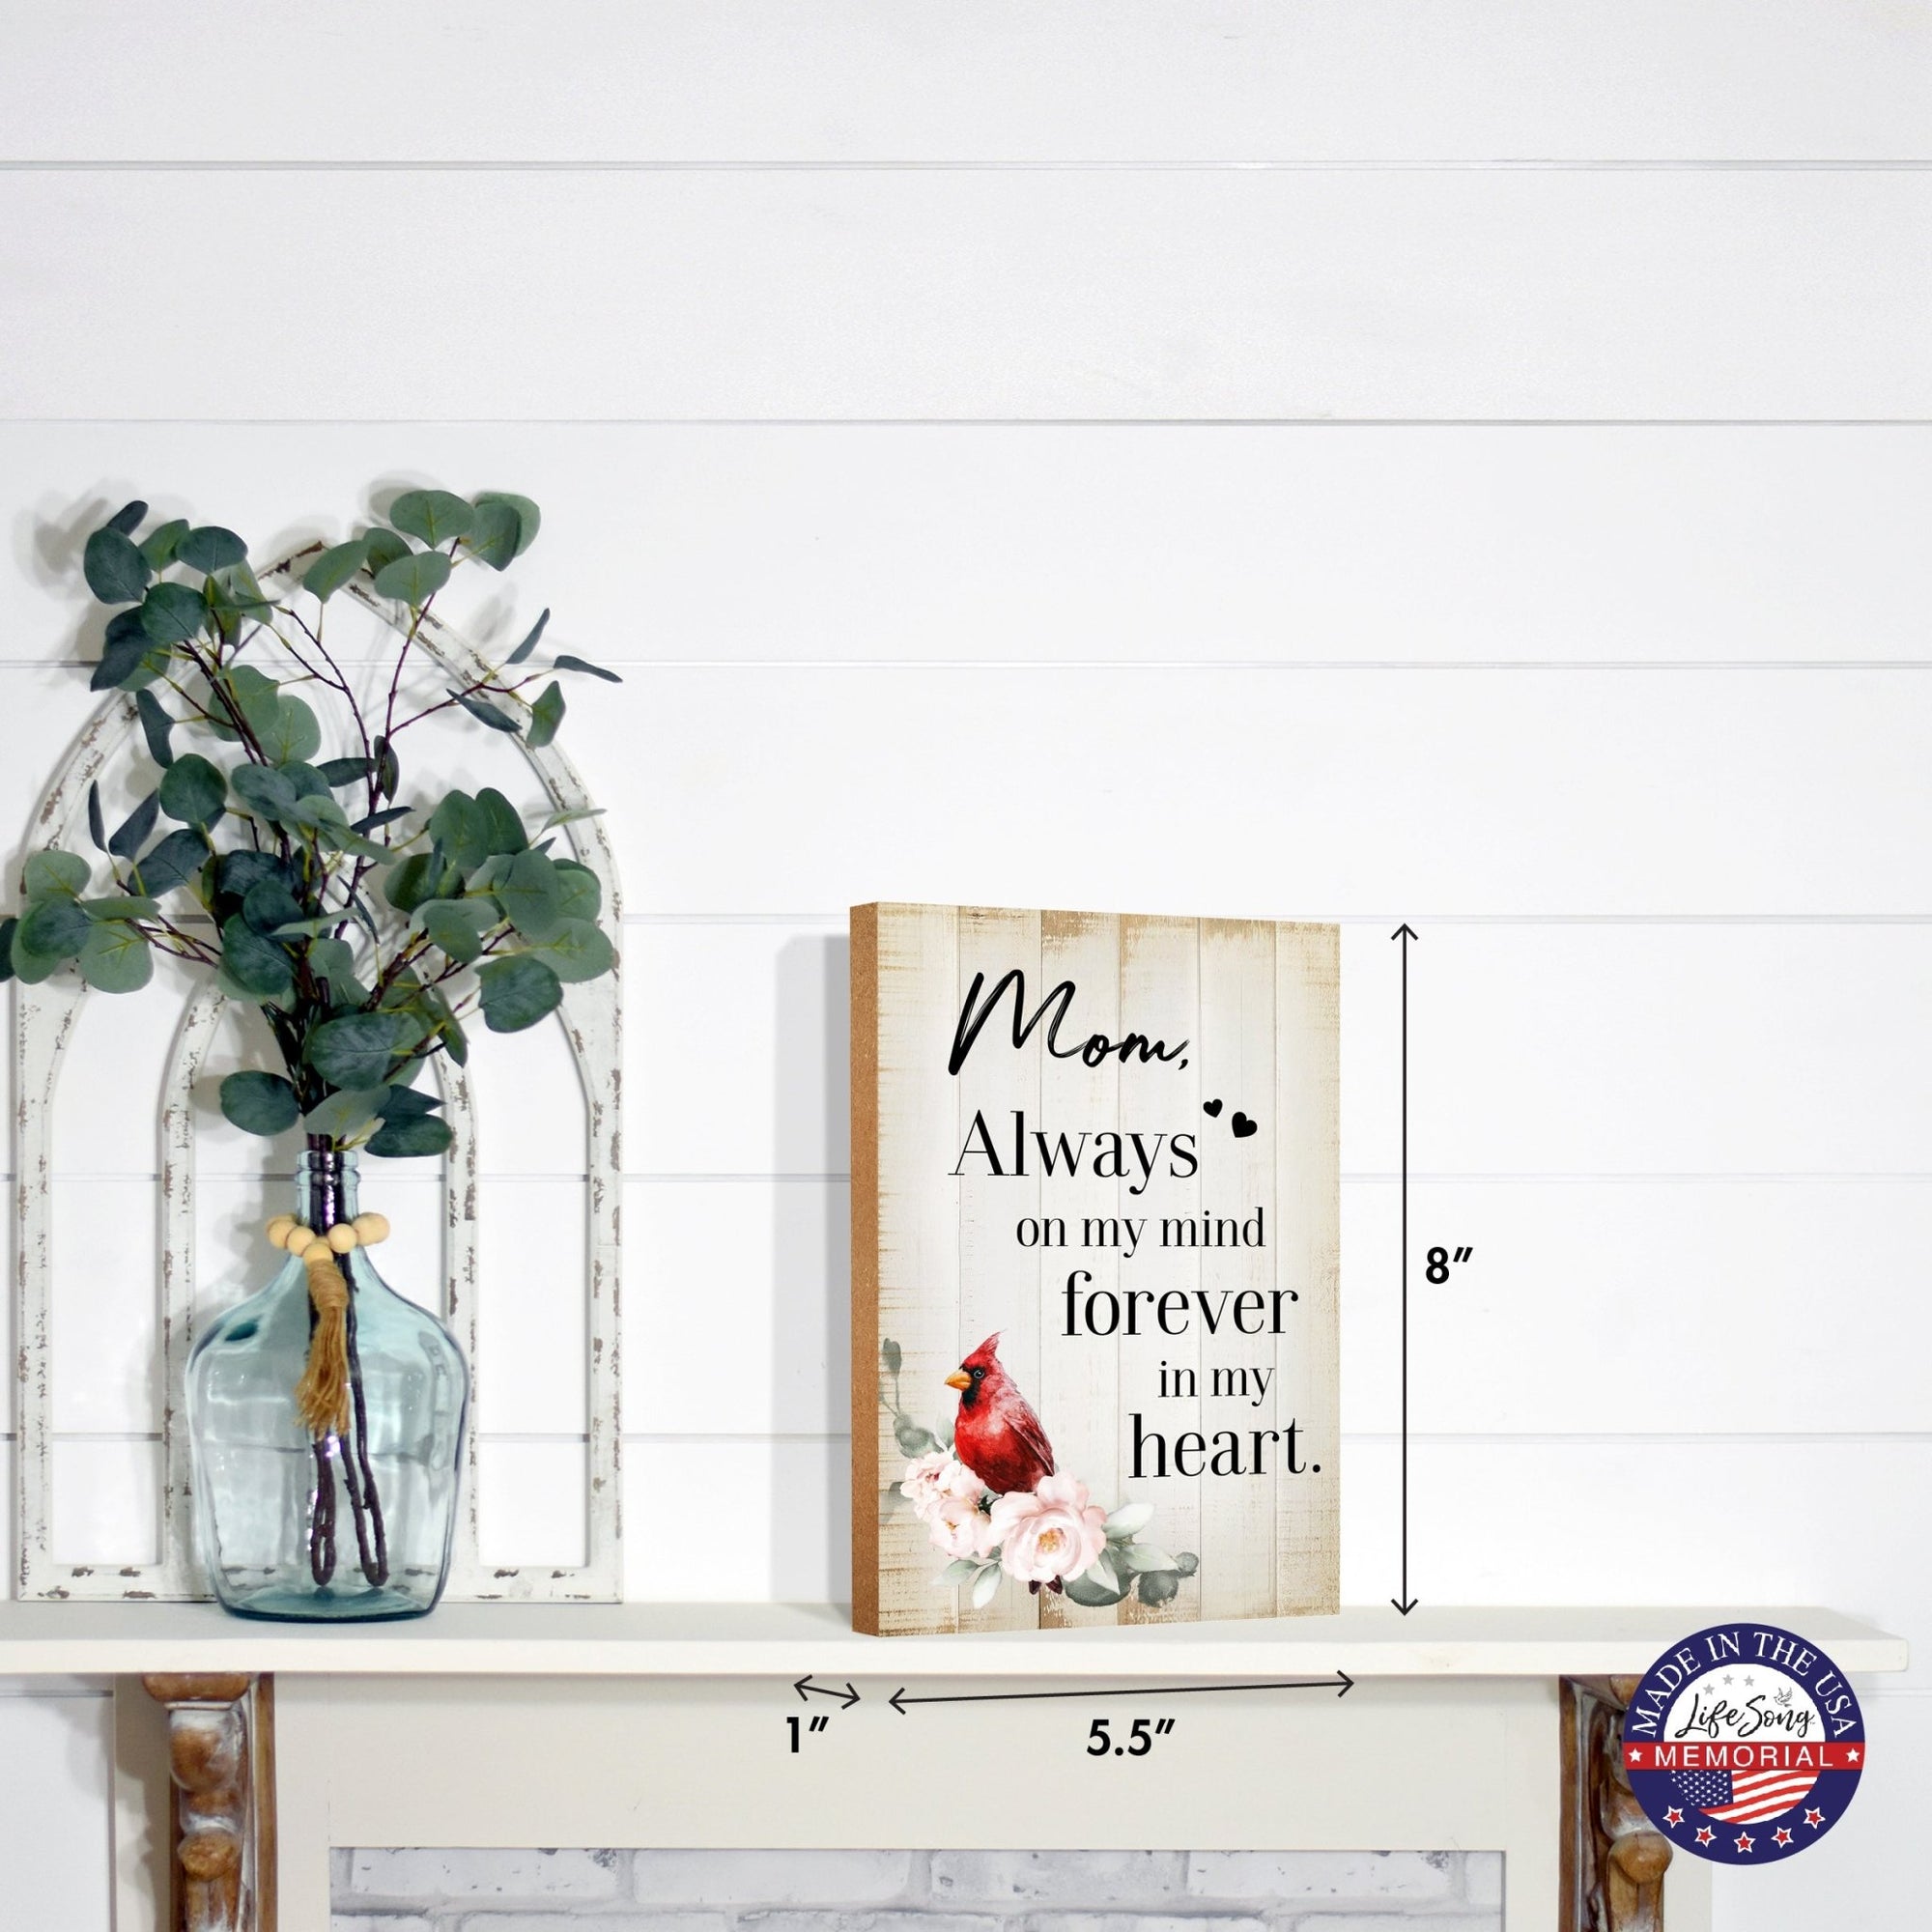 A tabletop memorial sign featuring a beautiful cardinal, a touching memorial gift for the loss of a loved one.